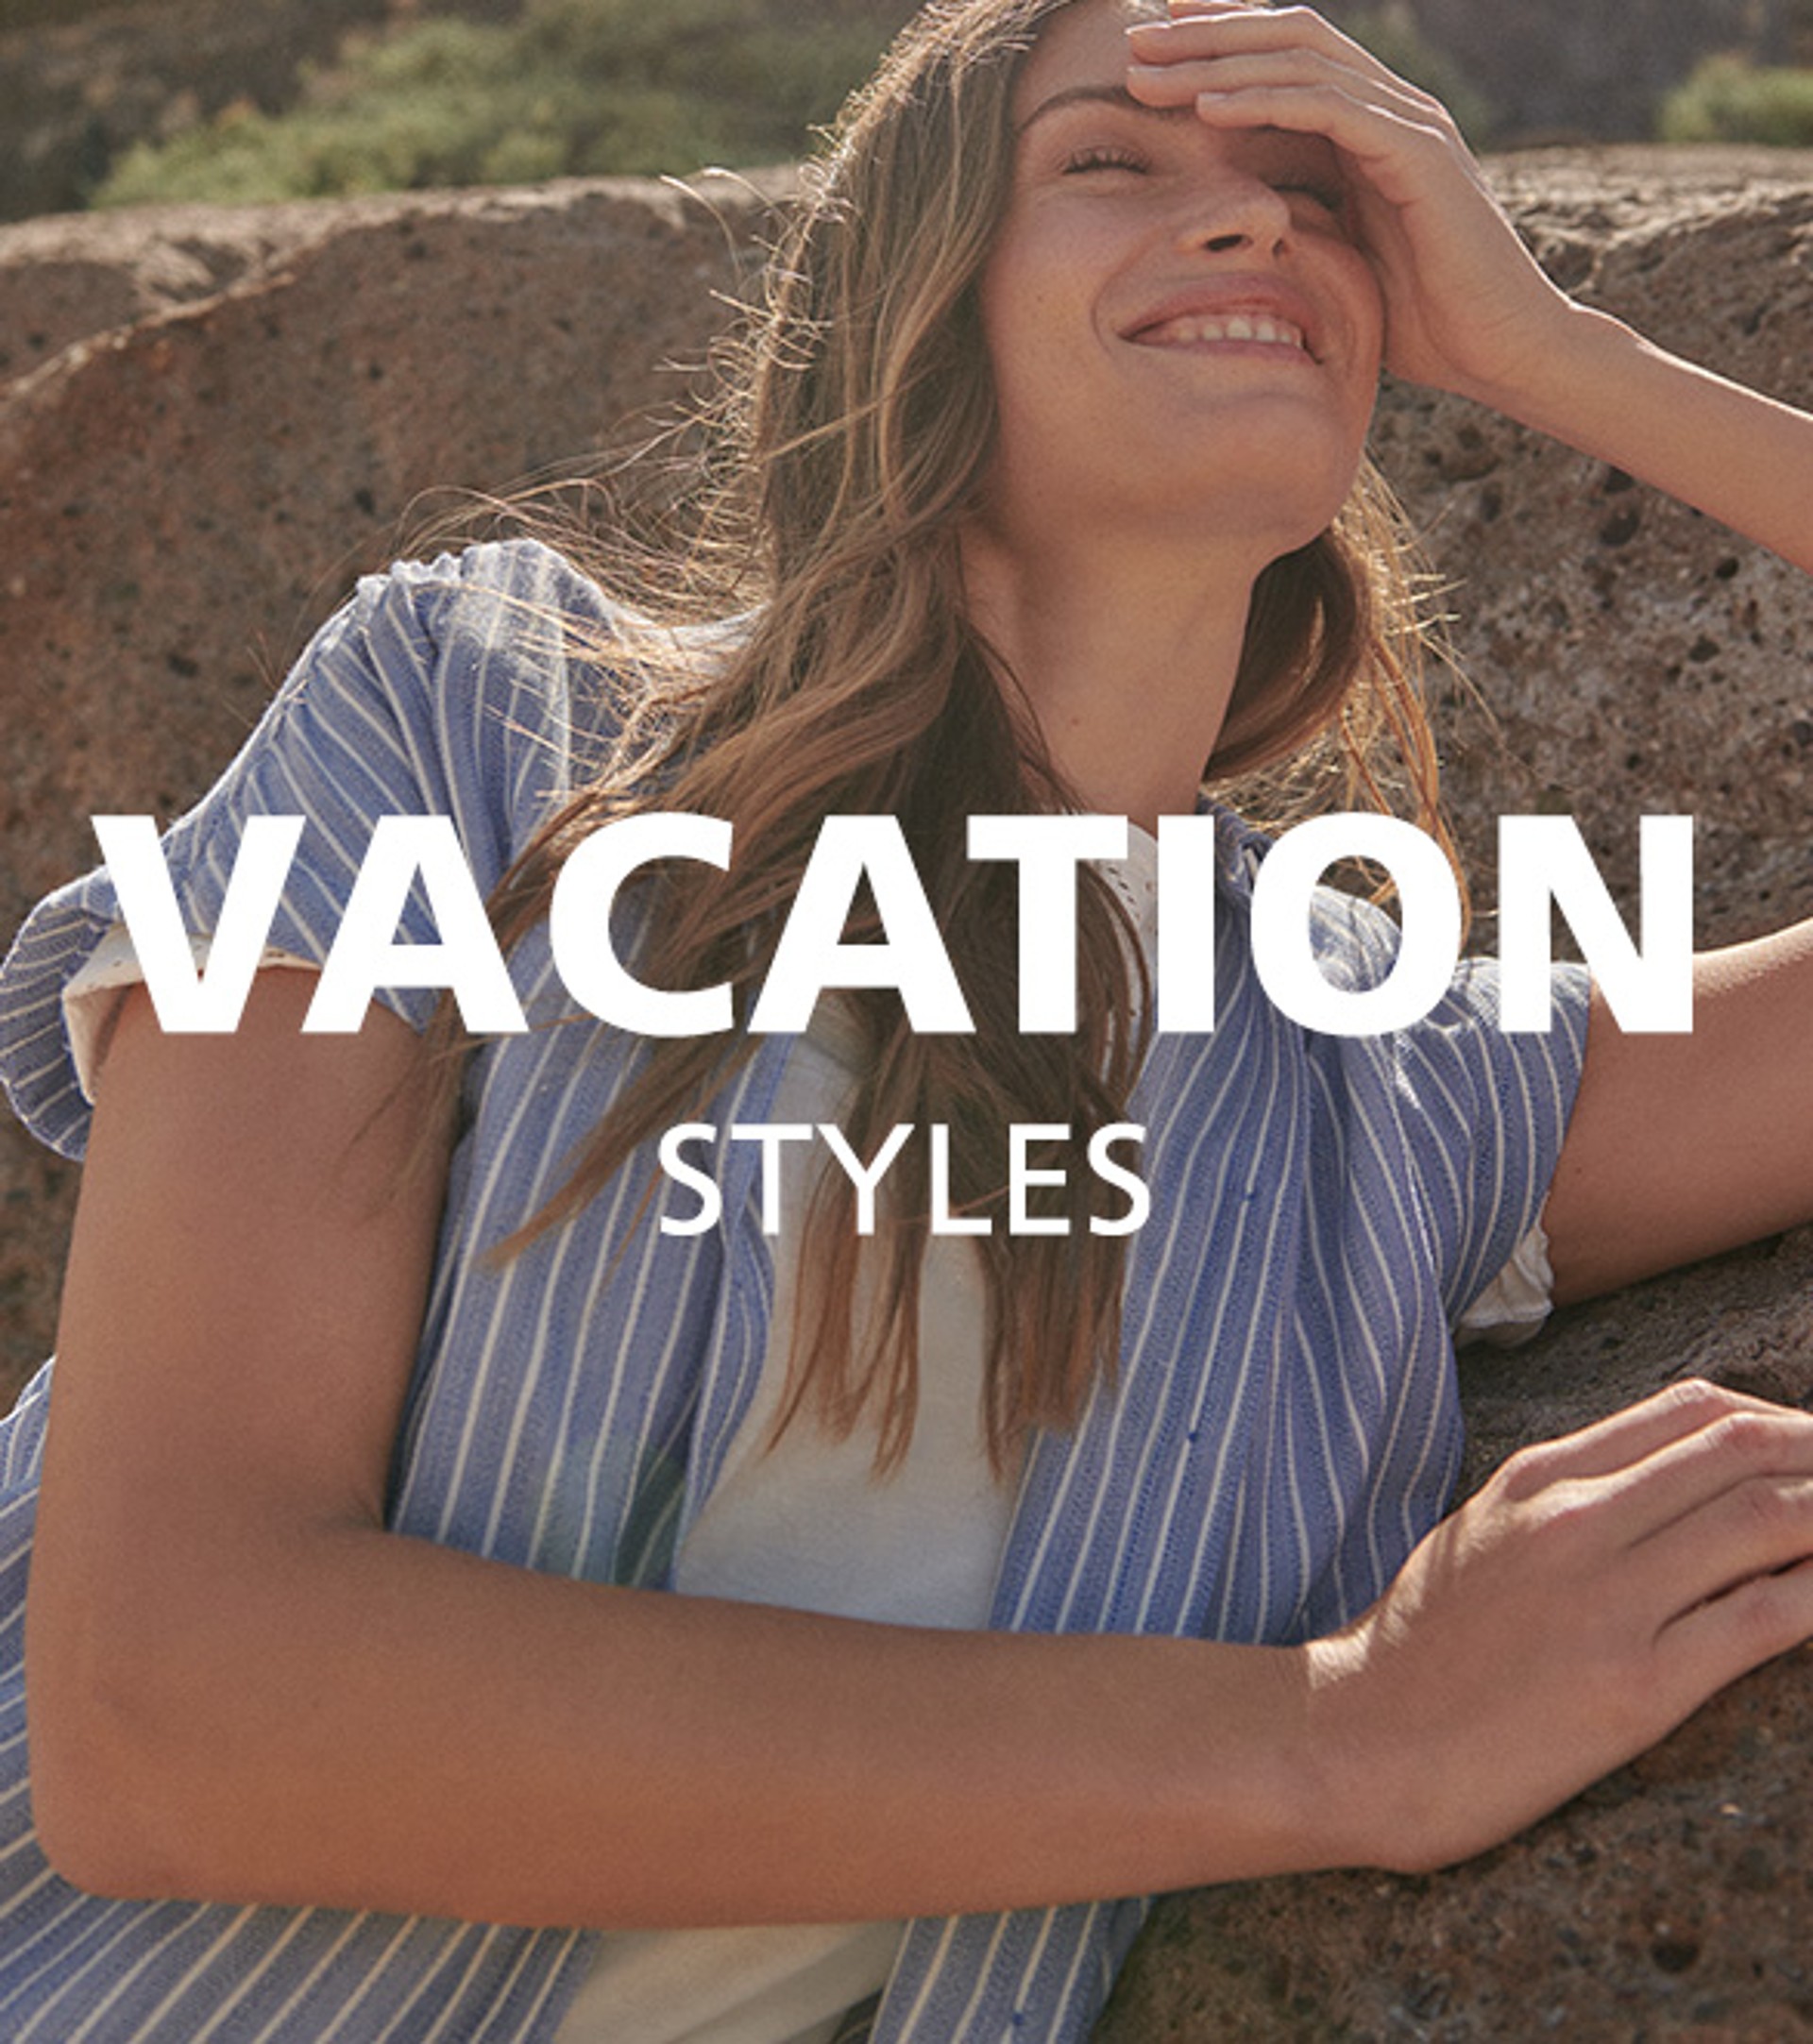 Vacation Styles